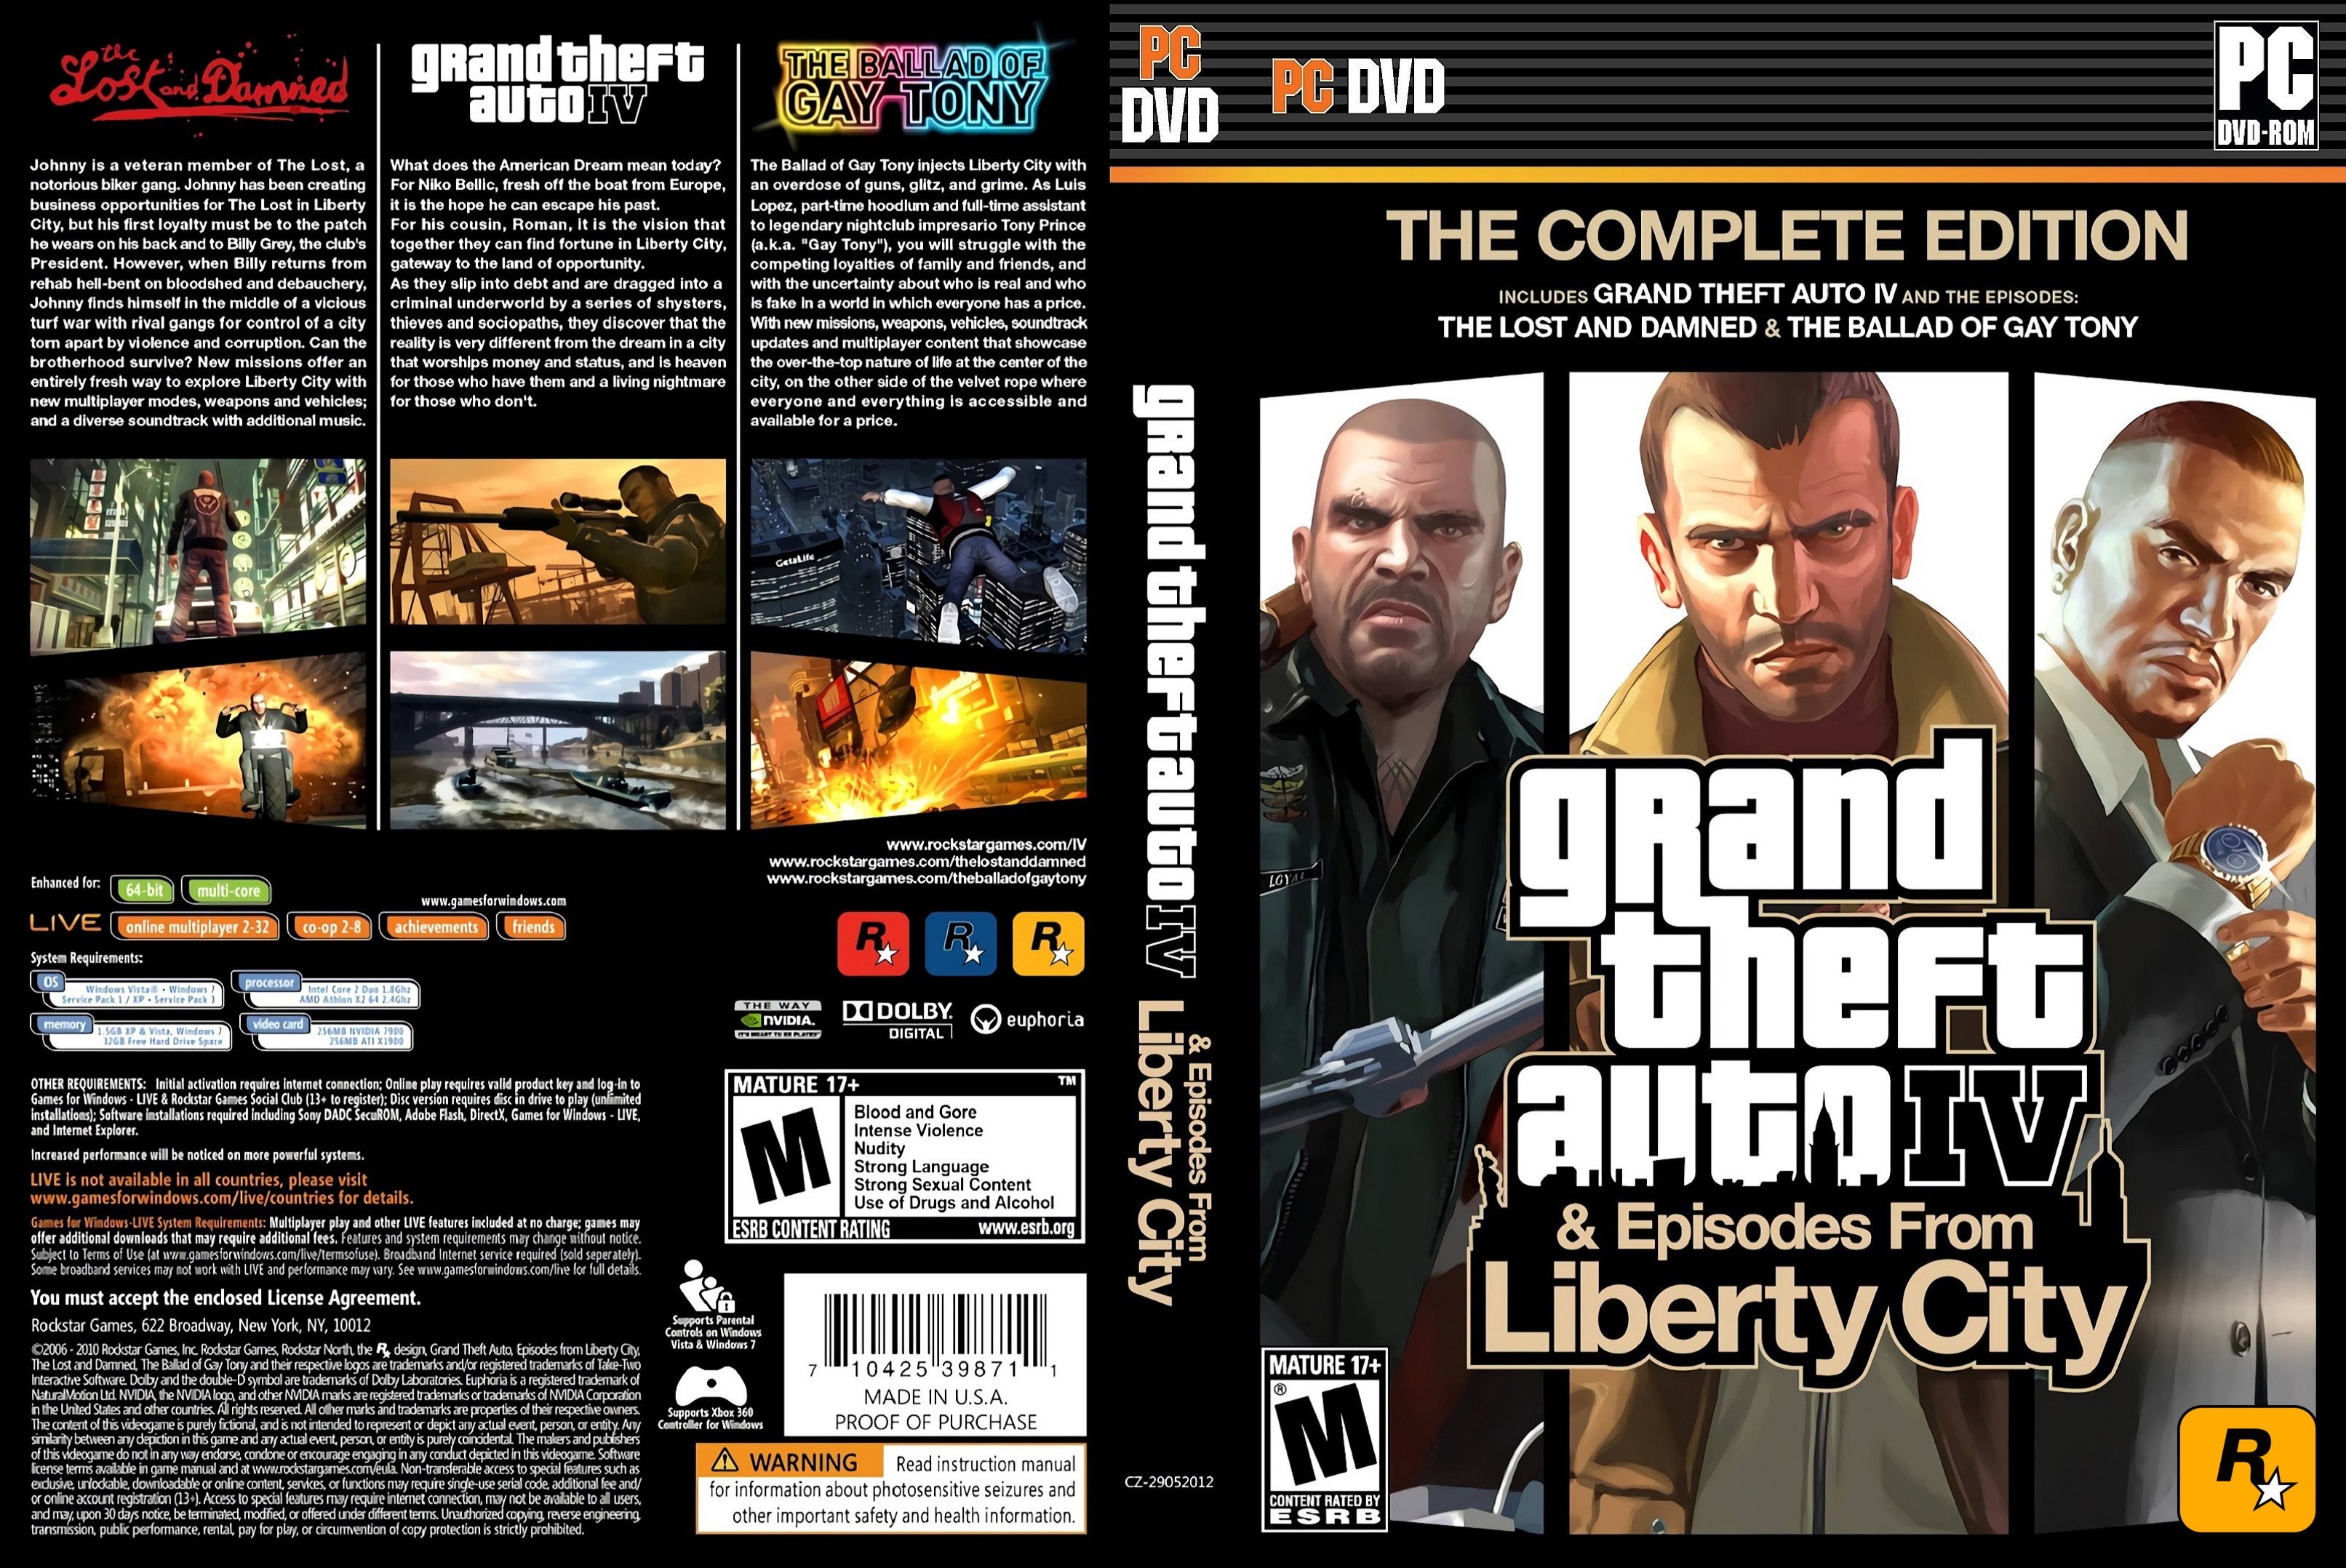 Download GTA IV Patch Latest 1.0.7.0 for Windows PC